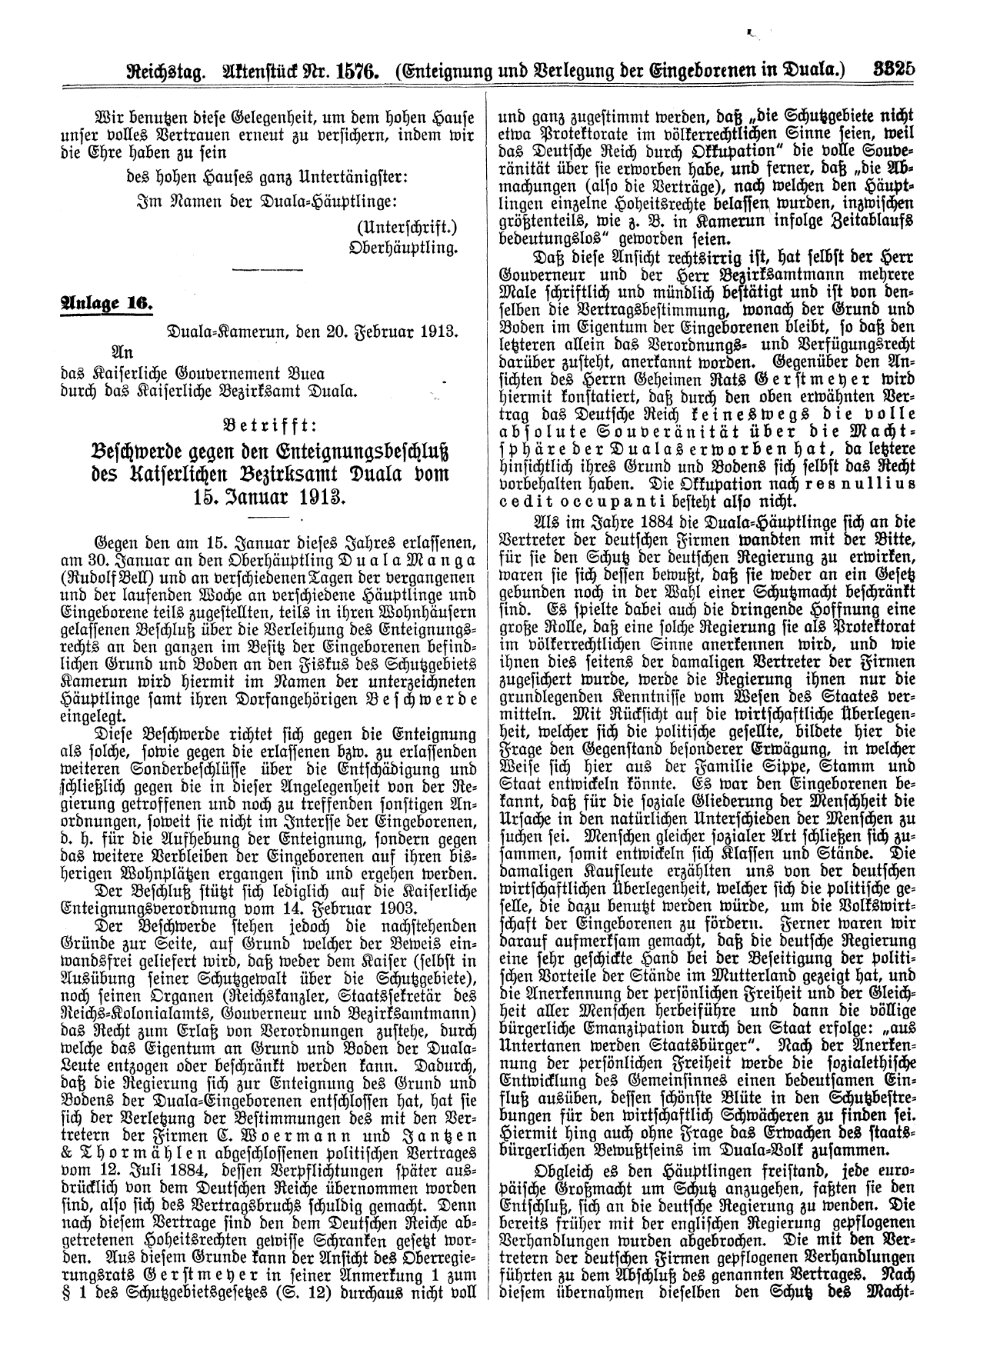 Scan of page 3325